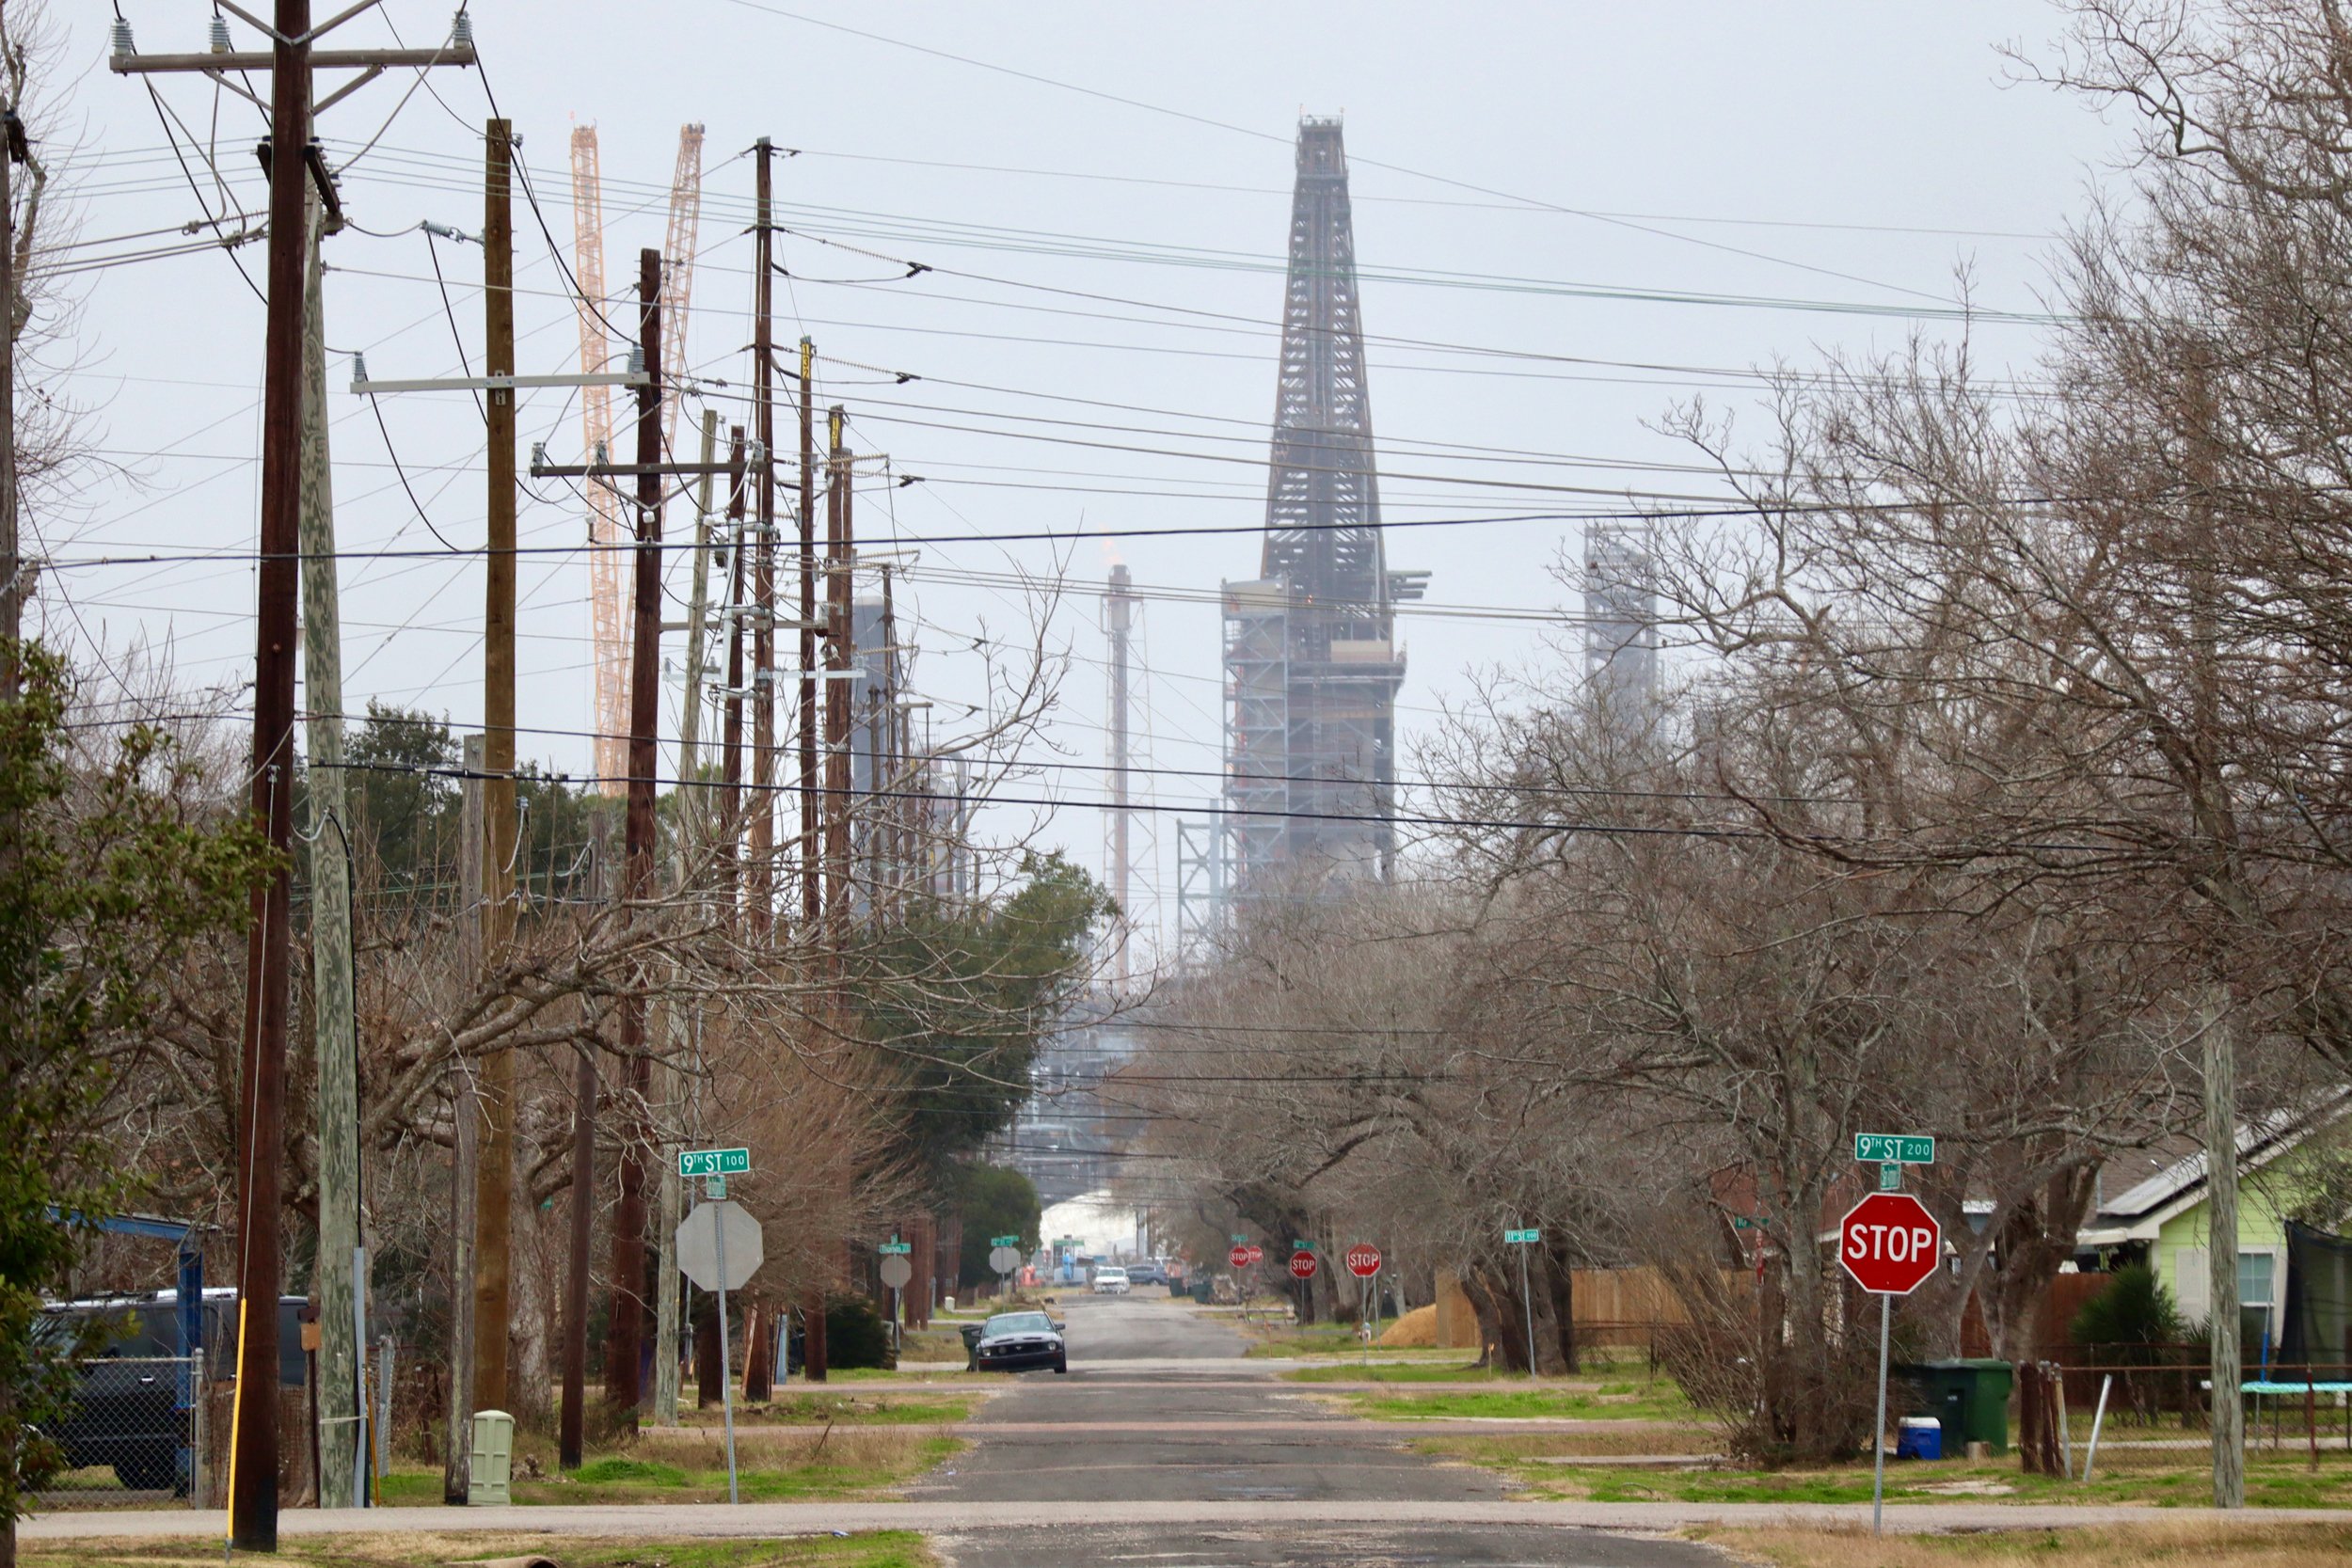 The infrastructure of an oil refinery towers over the homes and trees of a residential Texas neighborhood.